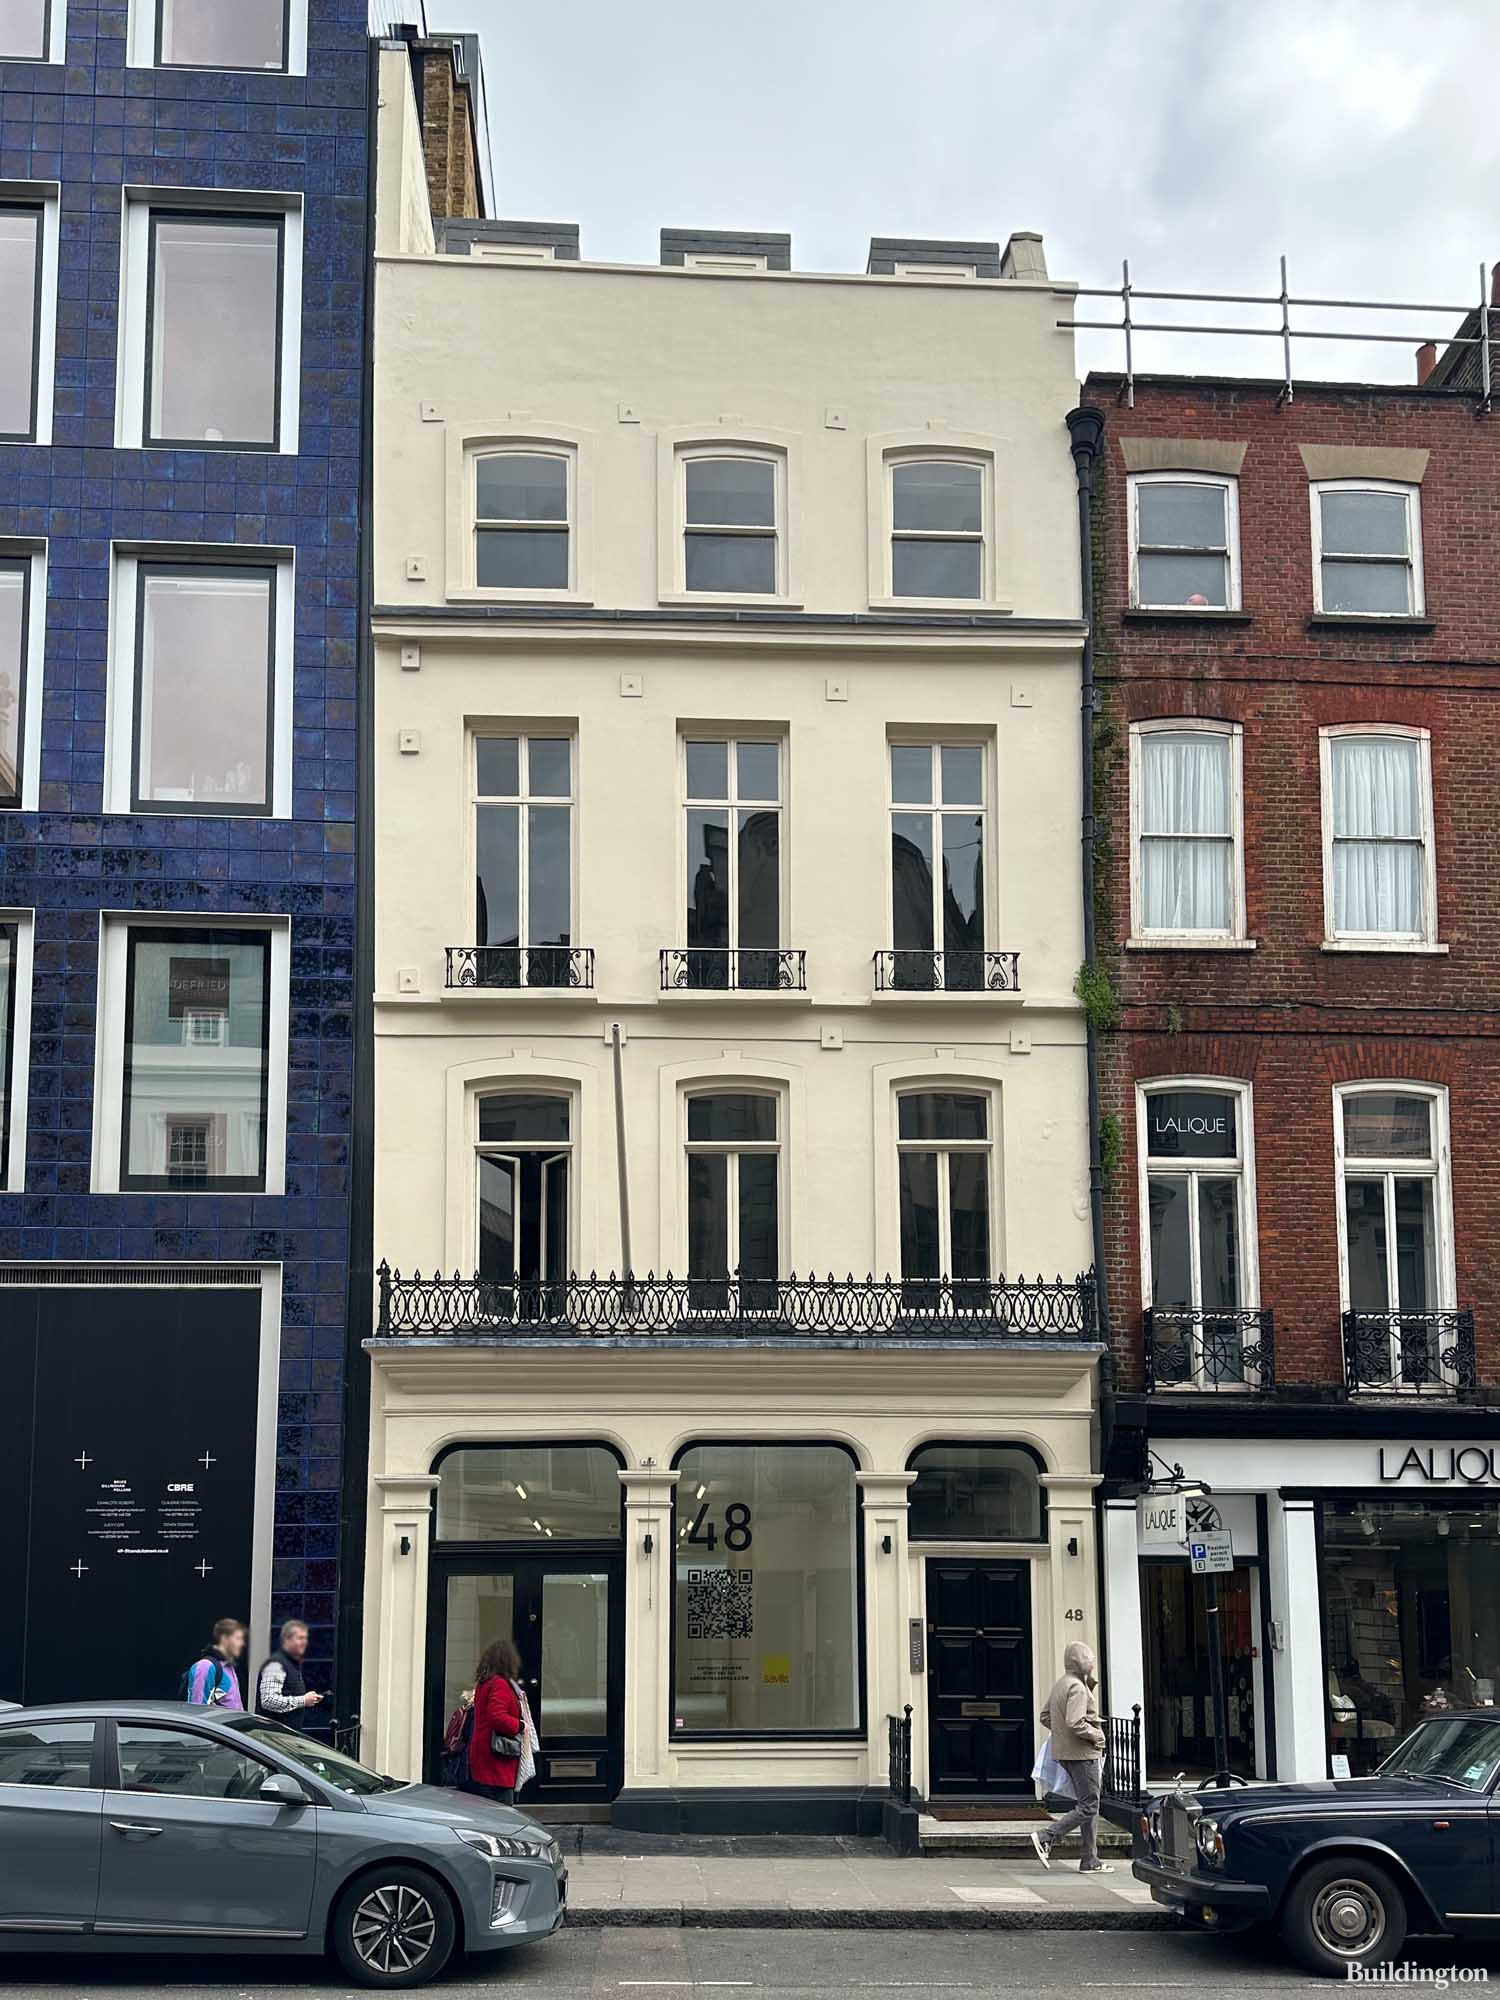 48 Conduit Street building is offered for rent by Savills in Mayfair, London W1.